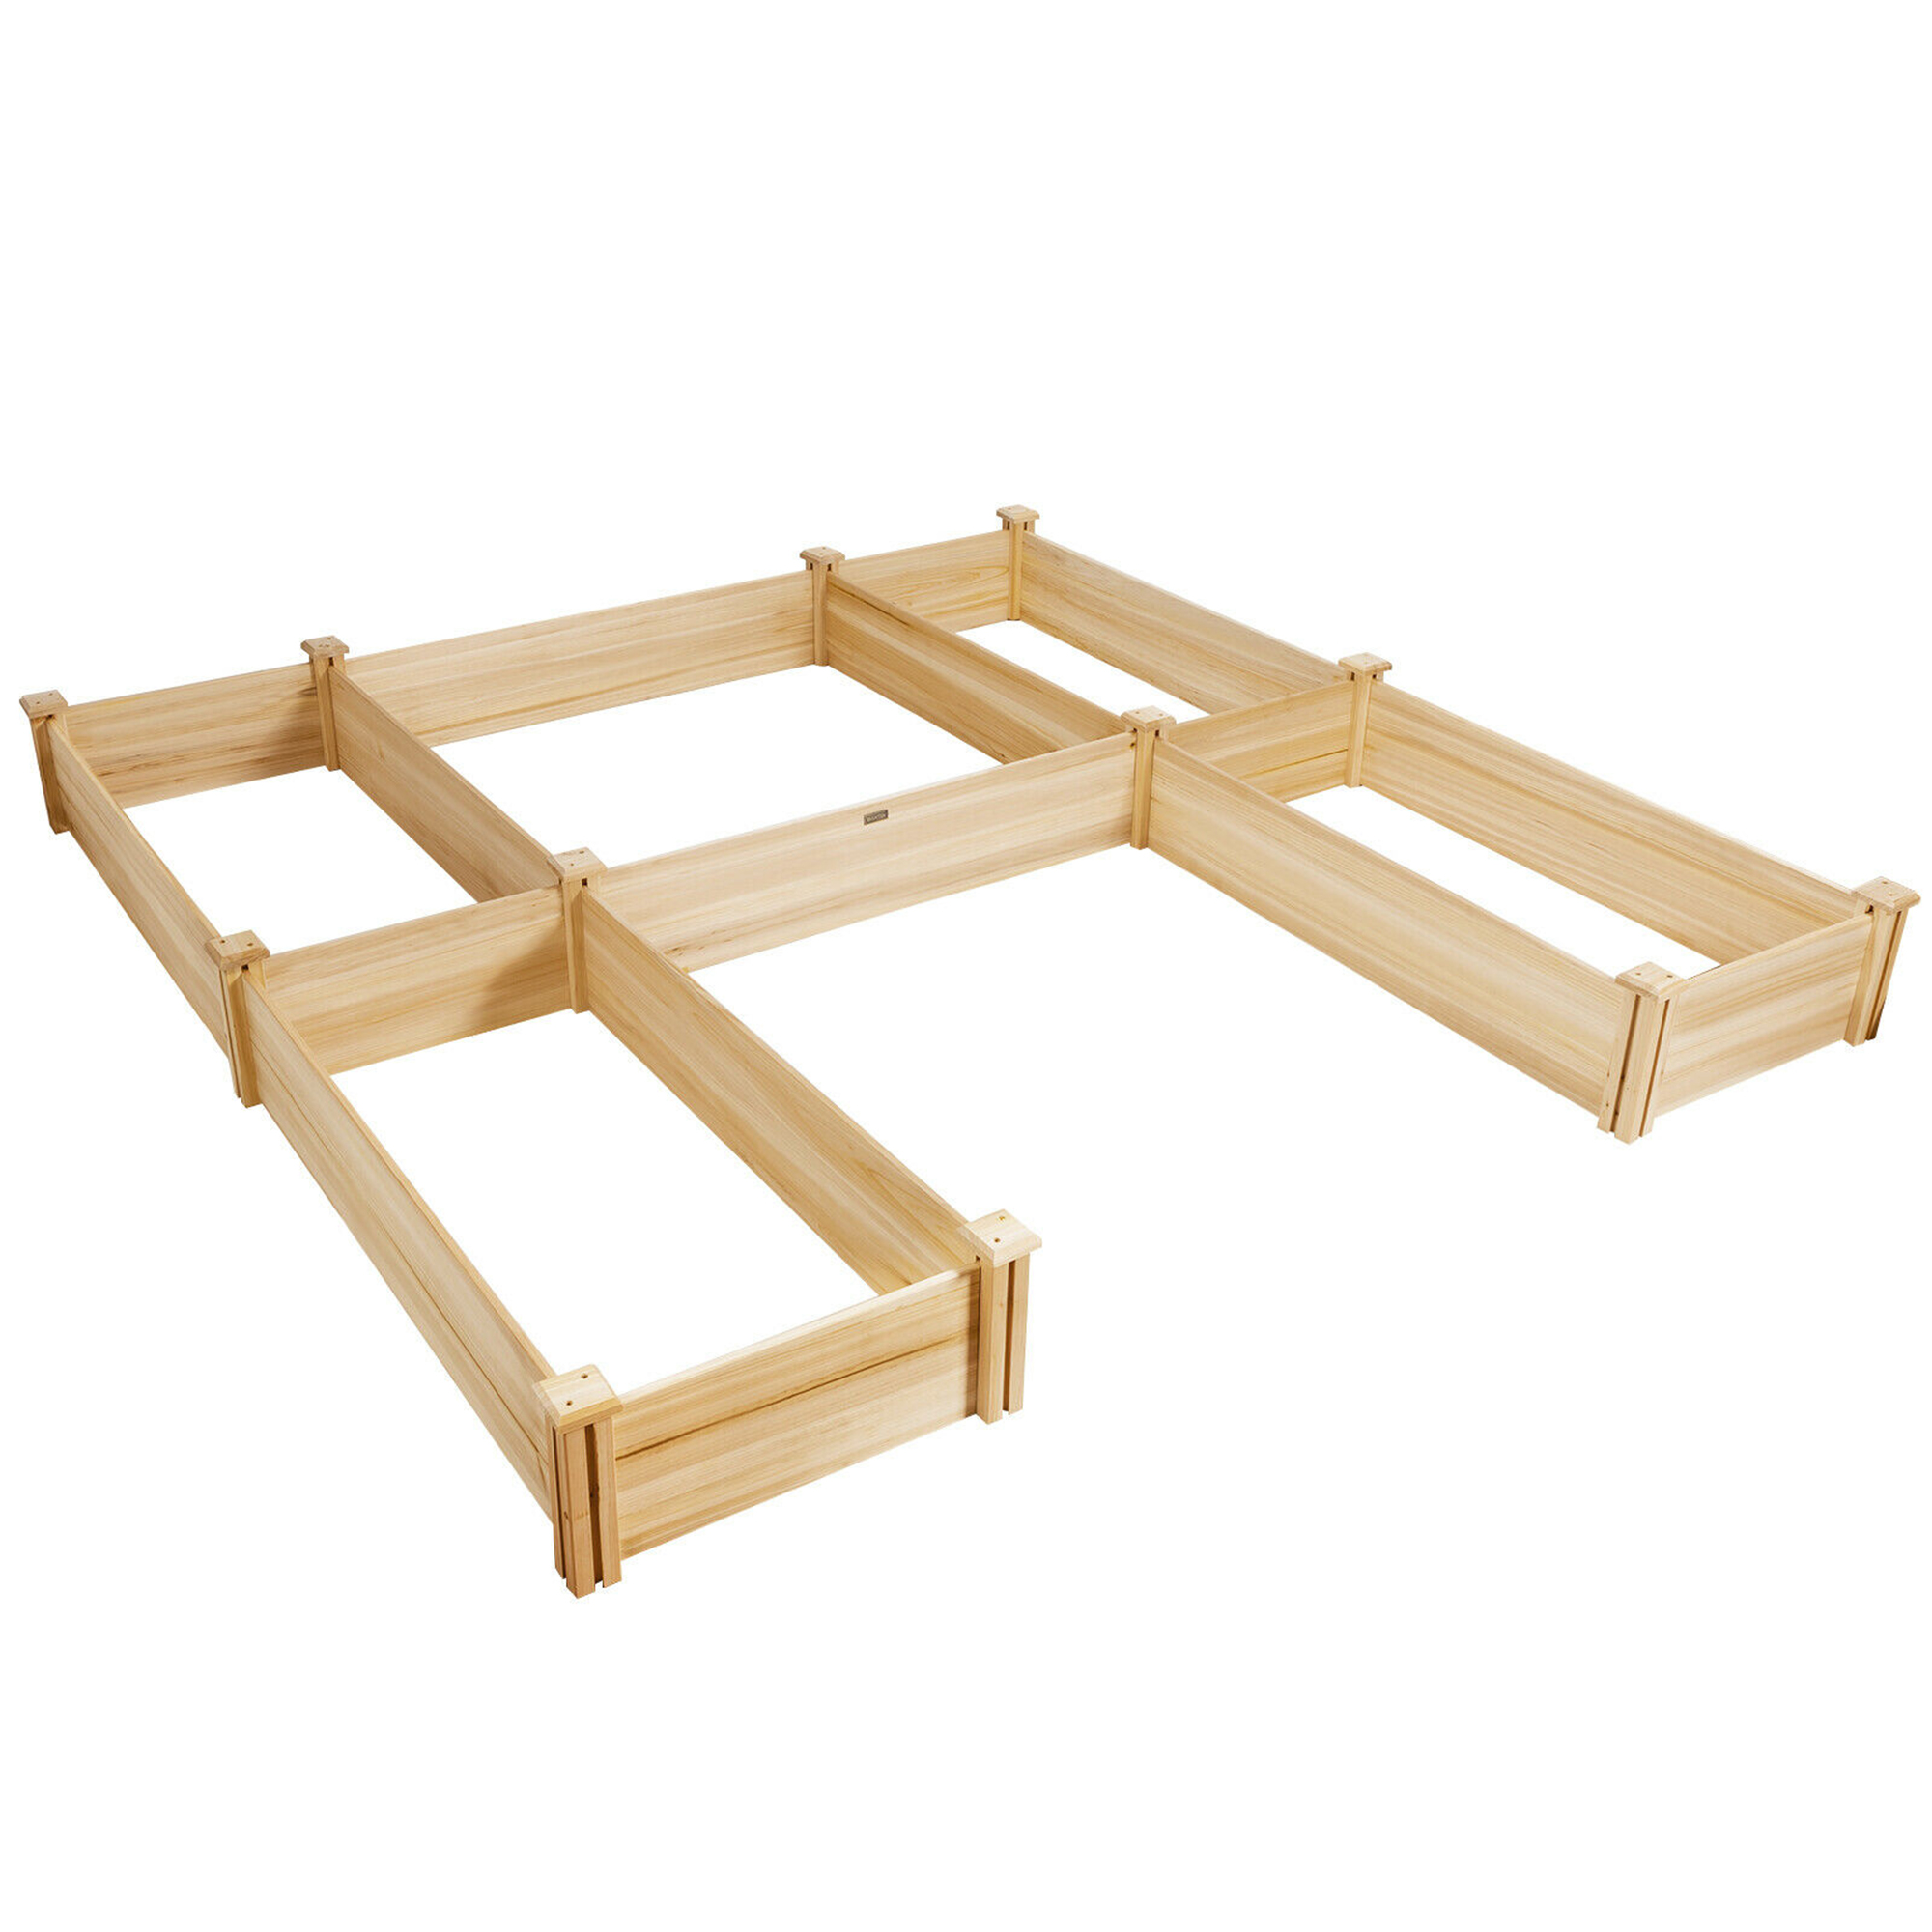 Gymax Raised Garden Bed 92.5x95x11in Wooden Garden Box Planter Container U-Shaped Bed - image 4 of 10